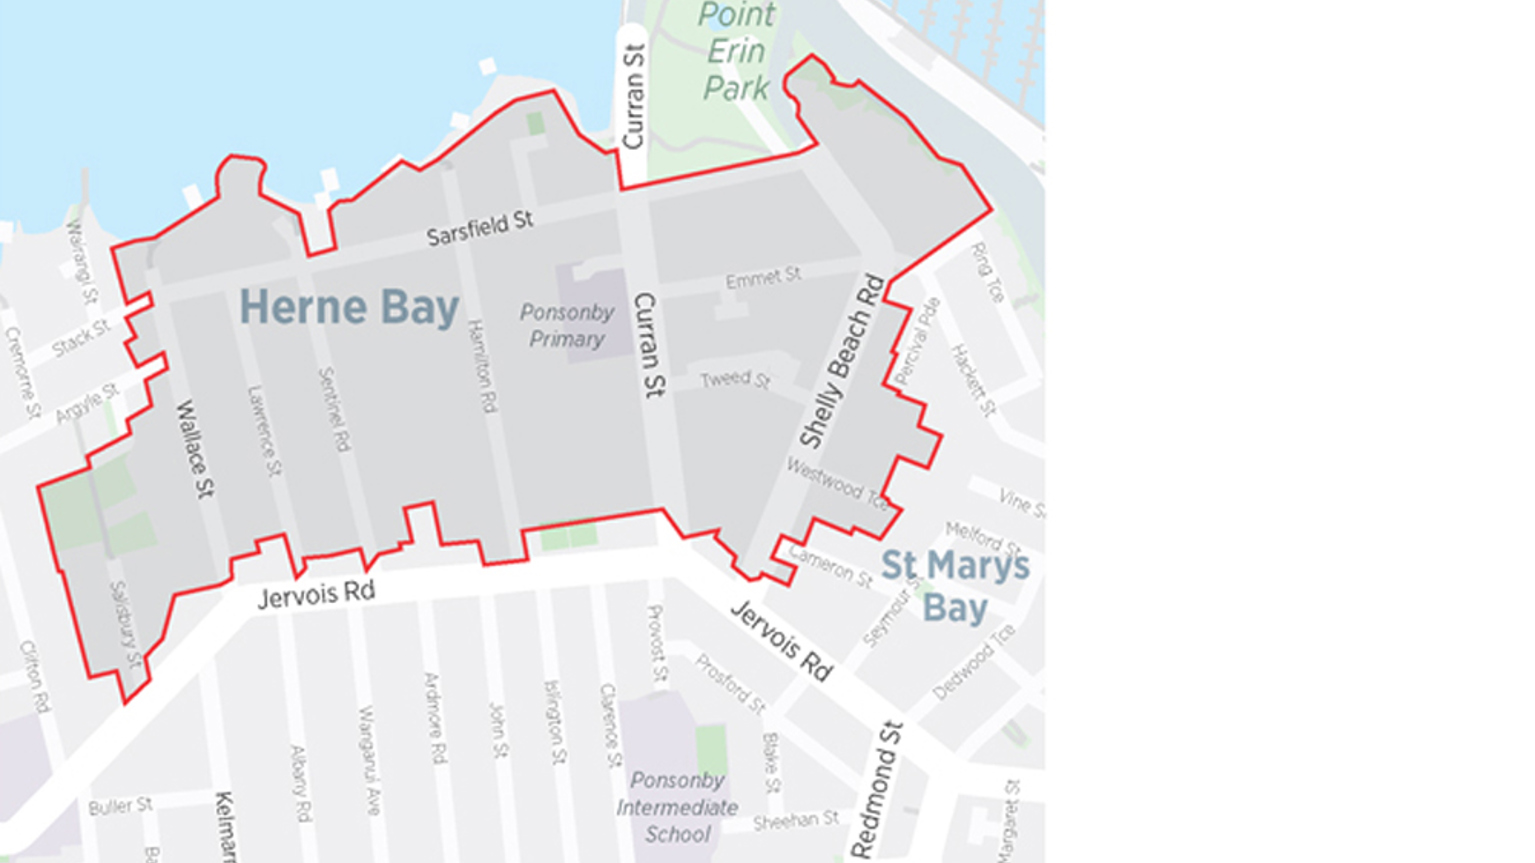 Map of Herne Bay with the resident parking zone boundaries indicated with red lines.